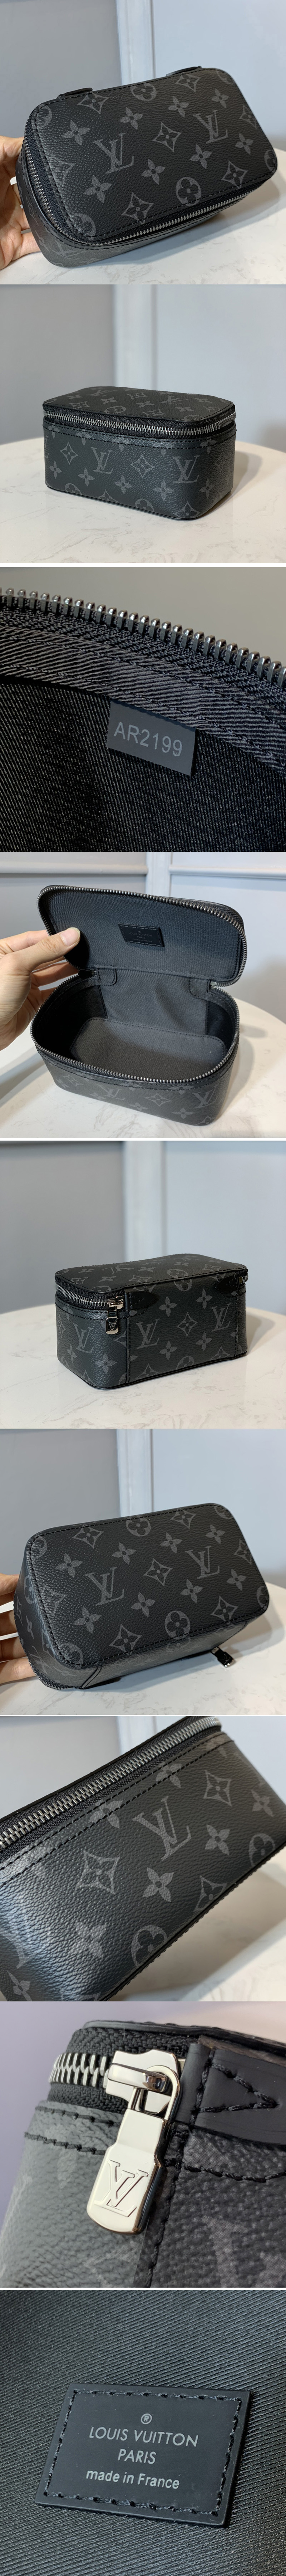 Replica Louis Vuitton Keepall Voyager Monogram Eclipse M43038 for Sale